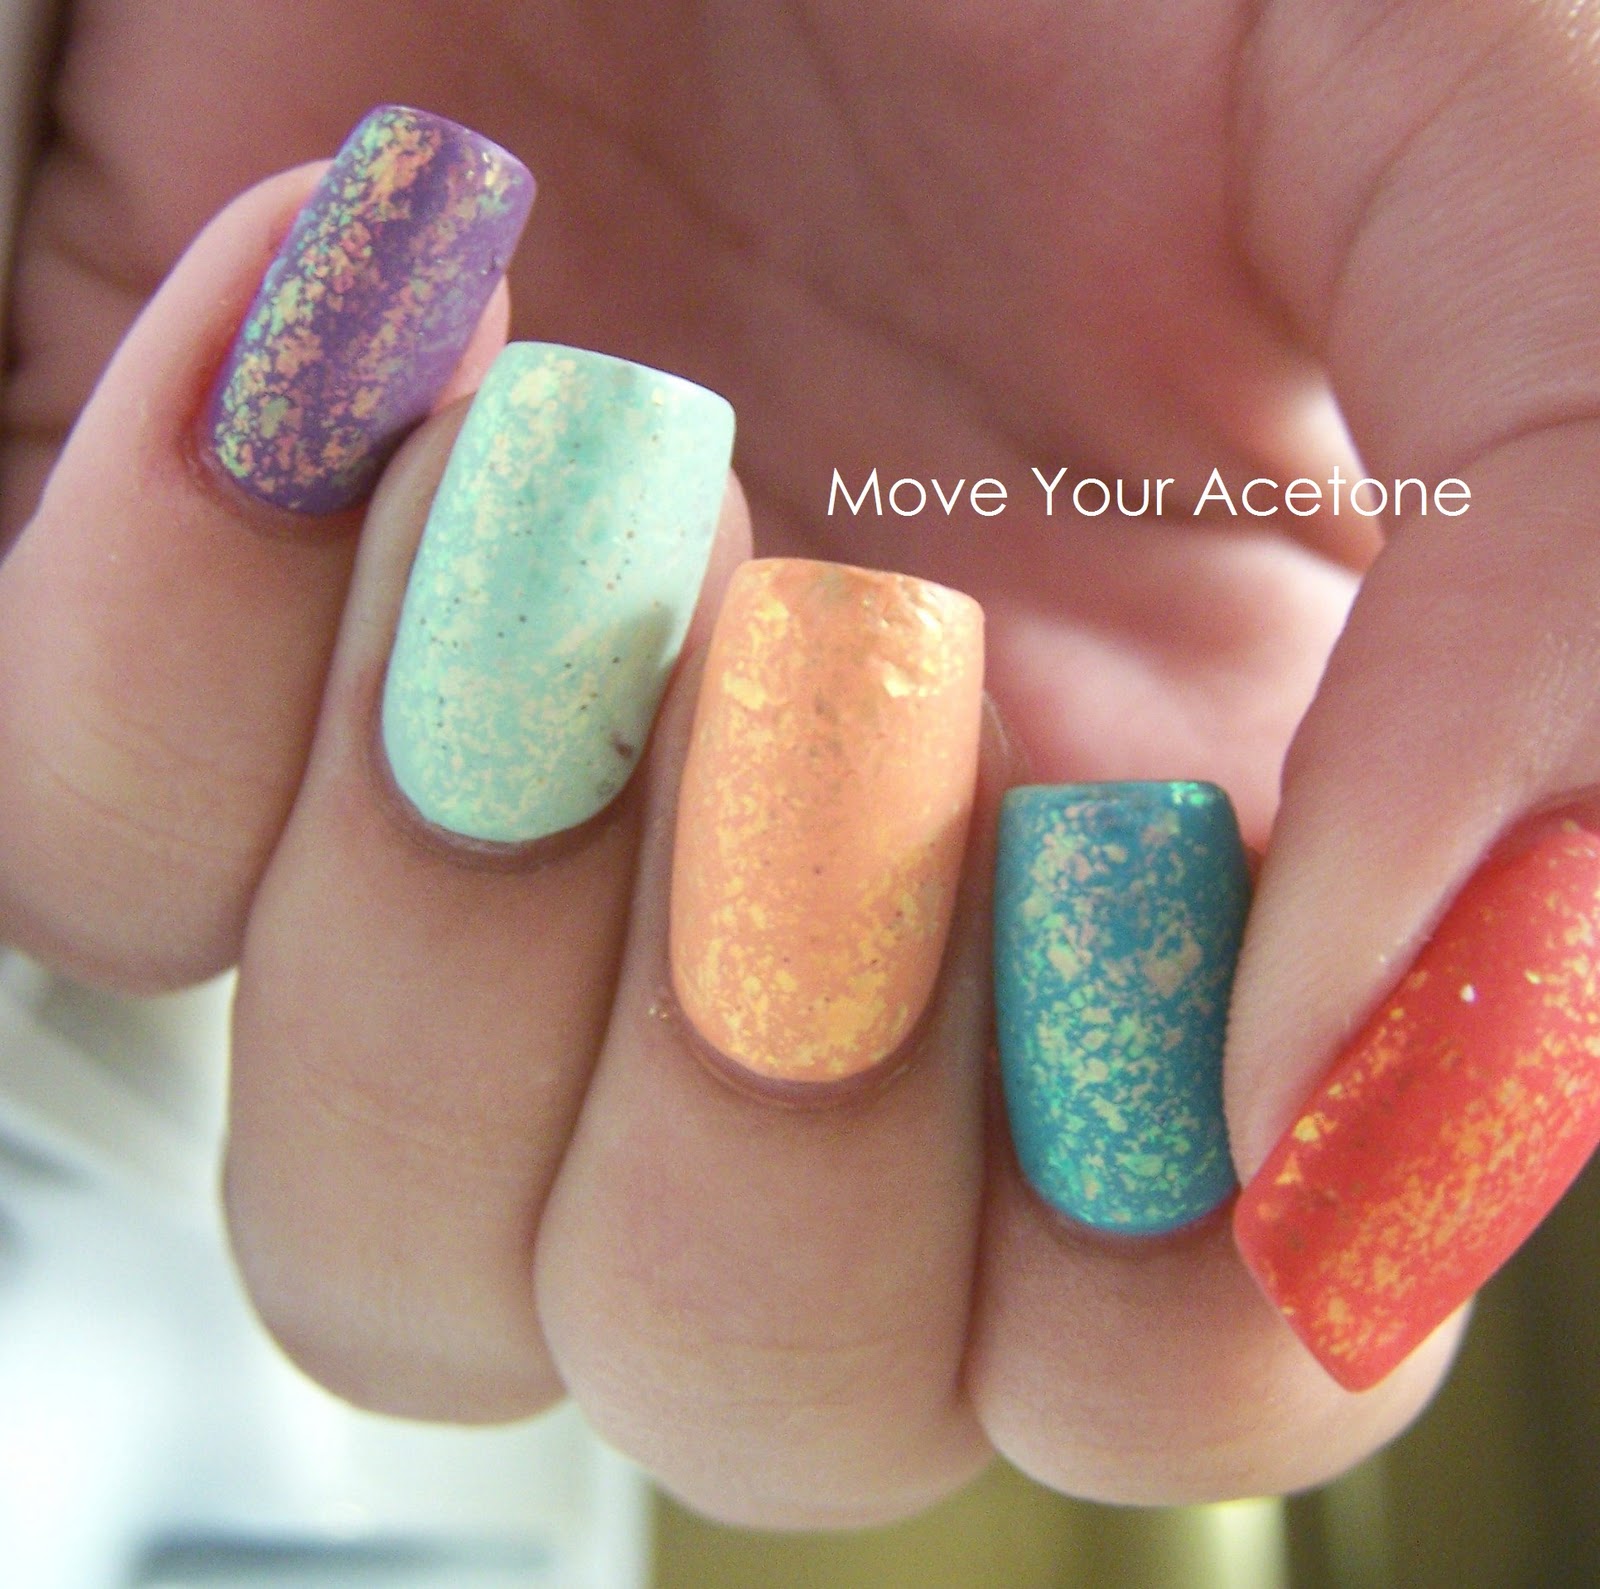 Move Your Acetone: Skittles!